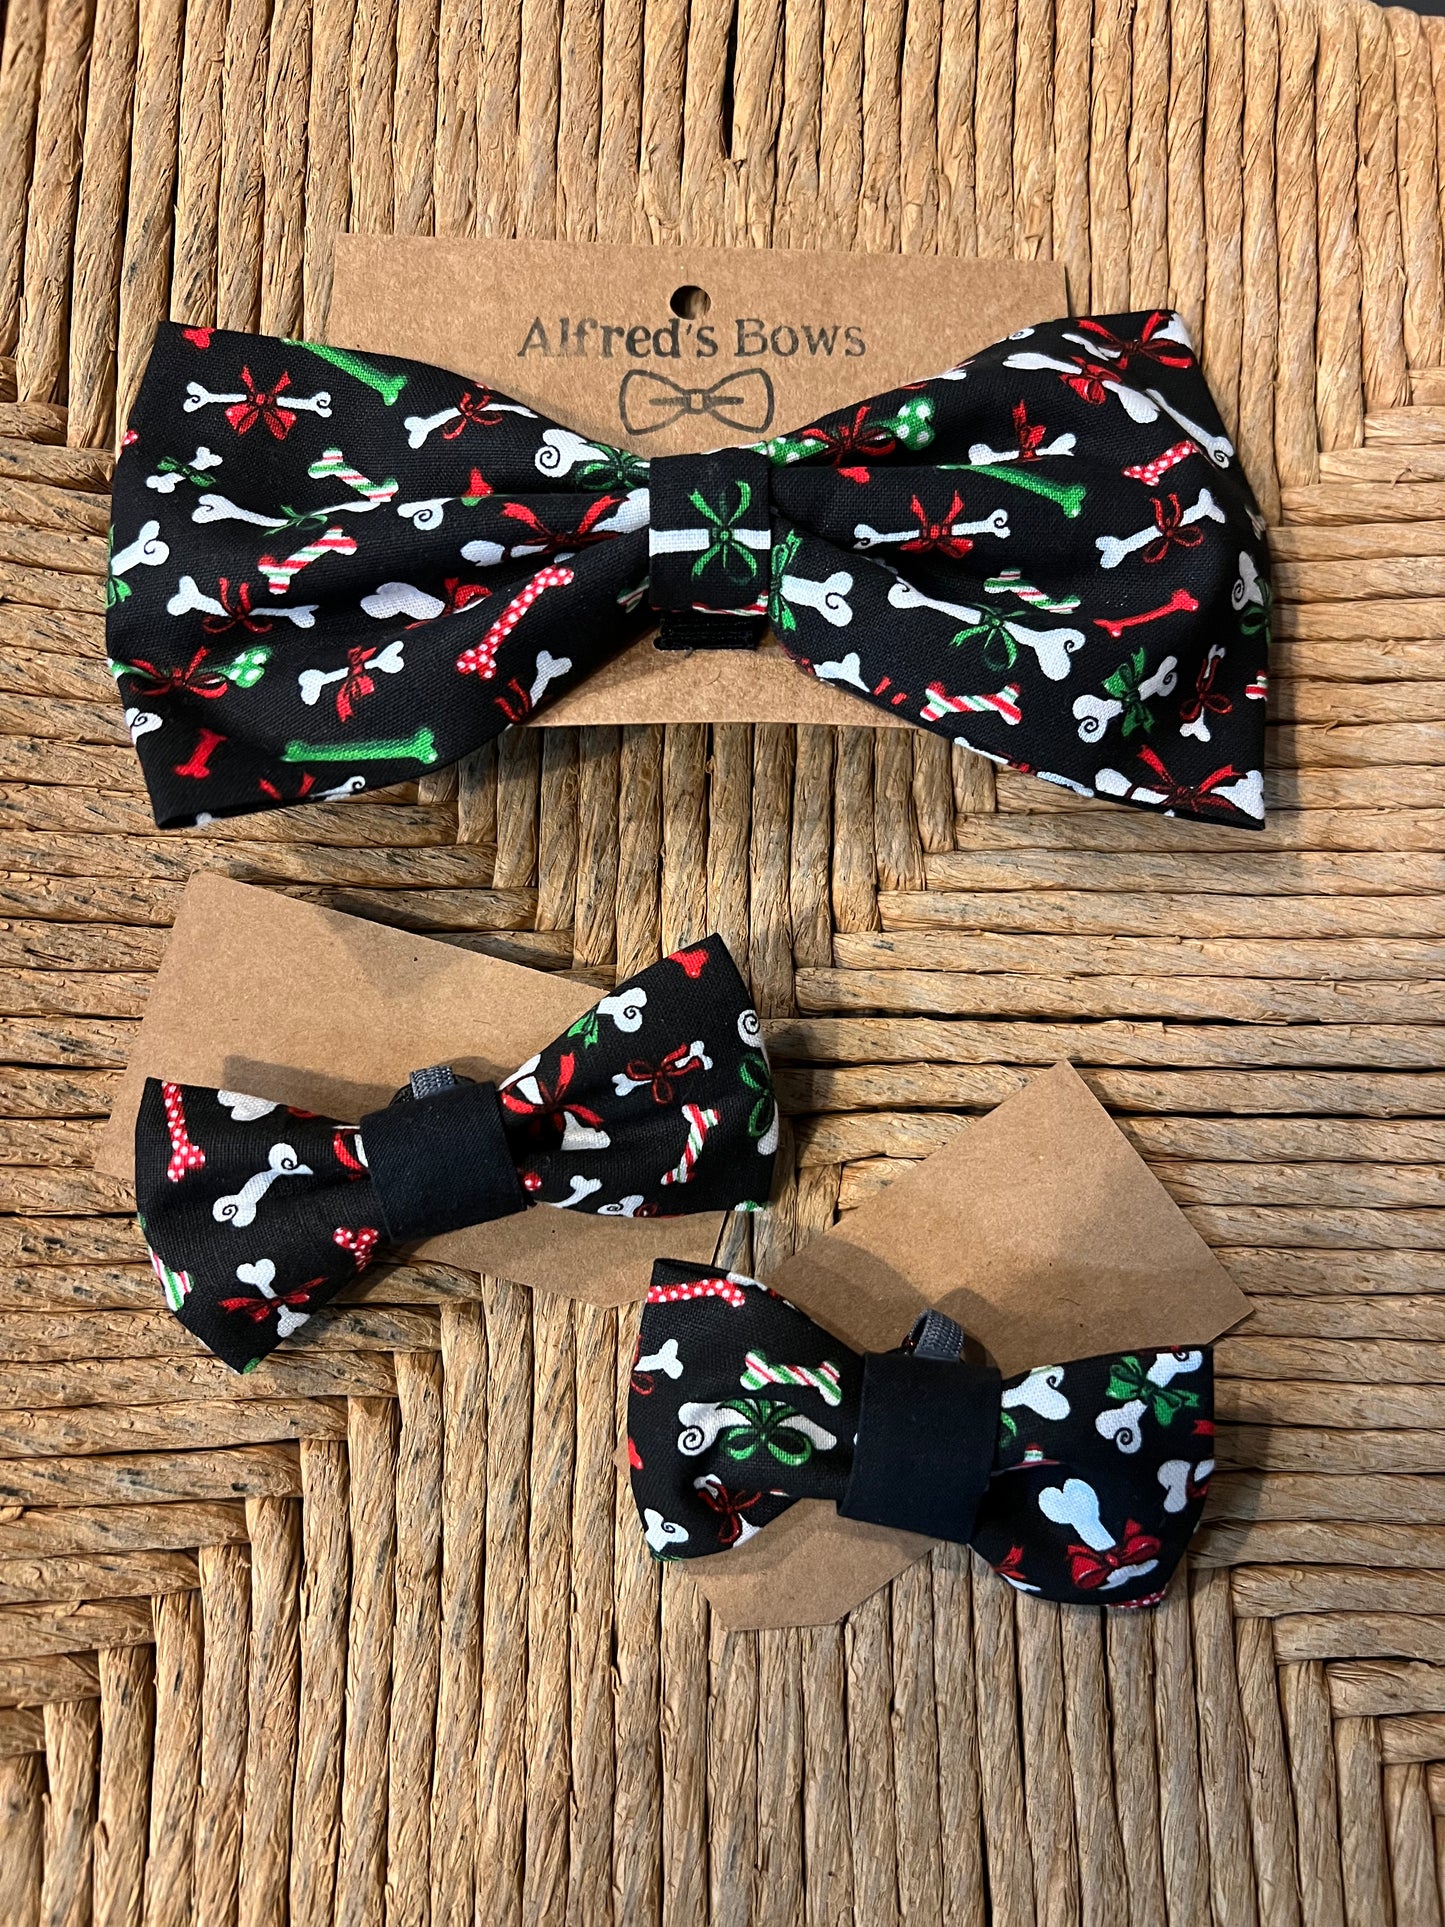 Alfred's Bows "Christmas Bones" Tiny Bow